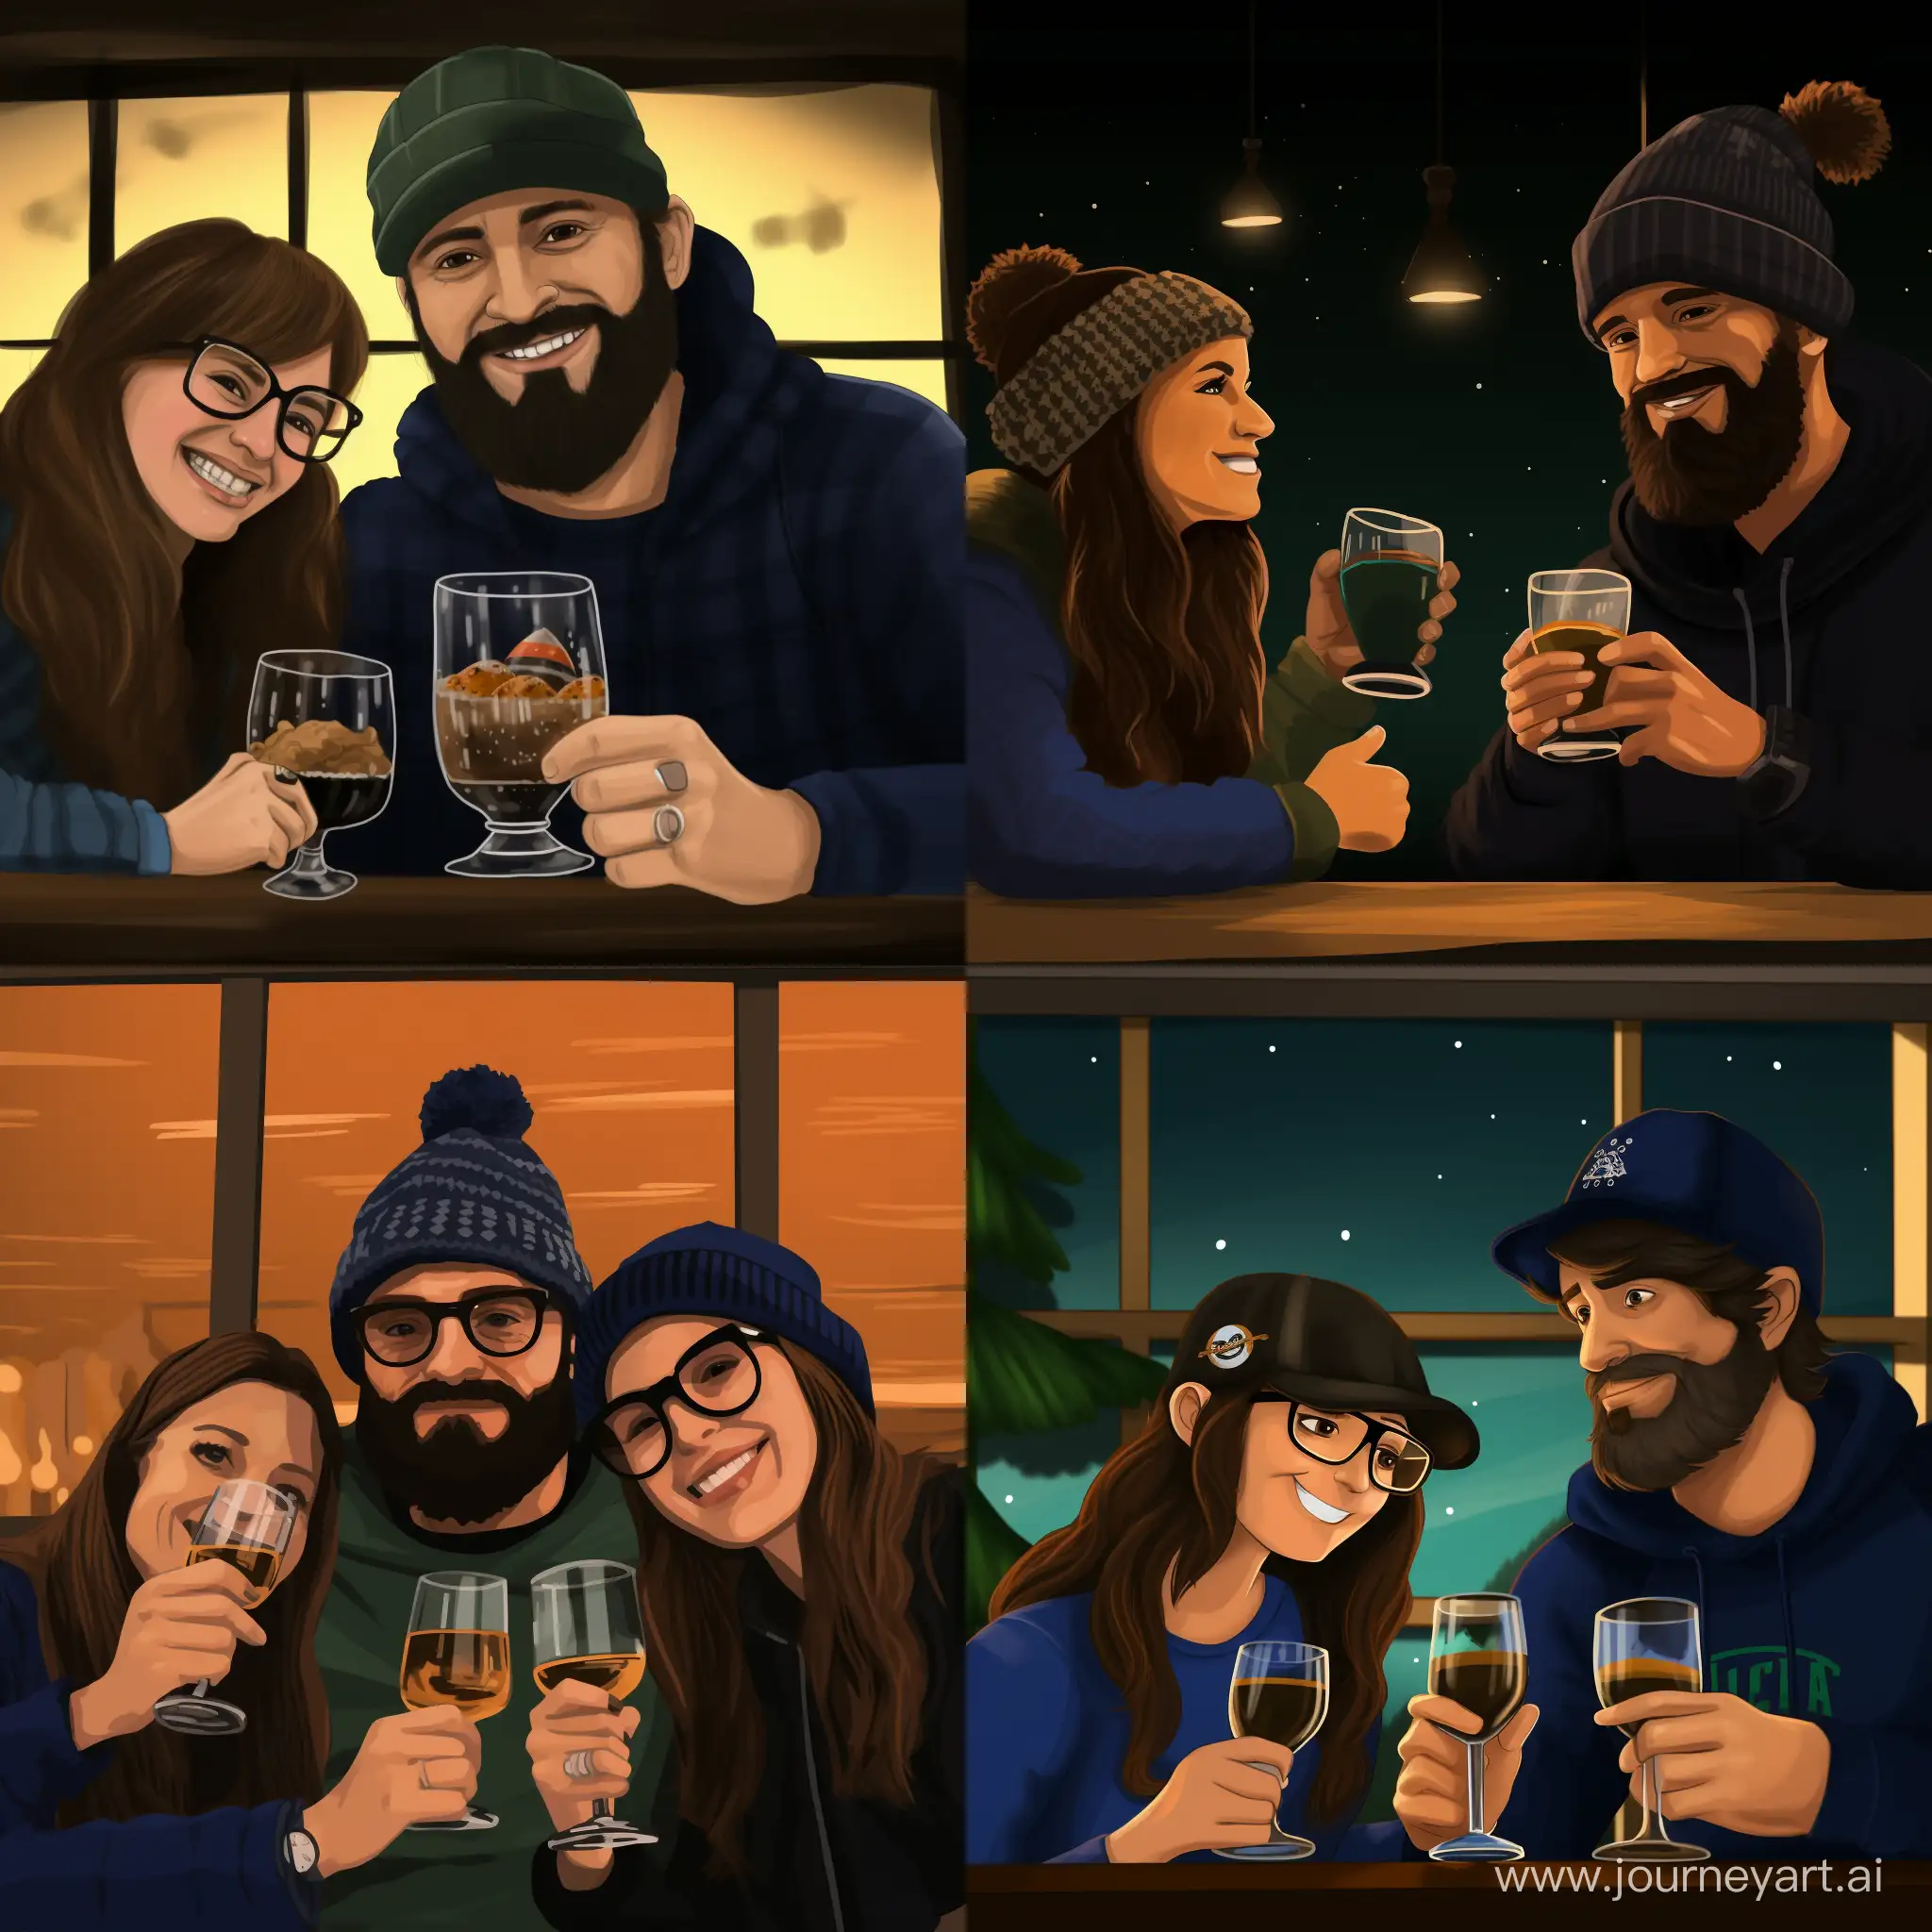 Make an image of a family of 3 people toasting to the new year 2024. The first person is a 33 year old women with long brown hair, blue eyes and large golden glasses. The second person is a 21 year old man with a dark beard, blue and green eyes wearing a dark blue fisherman hat. The third person is their 2,5 year old boy with blue eyes, dark blond hair and holding a fire truck toy.